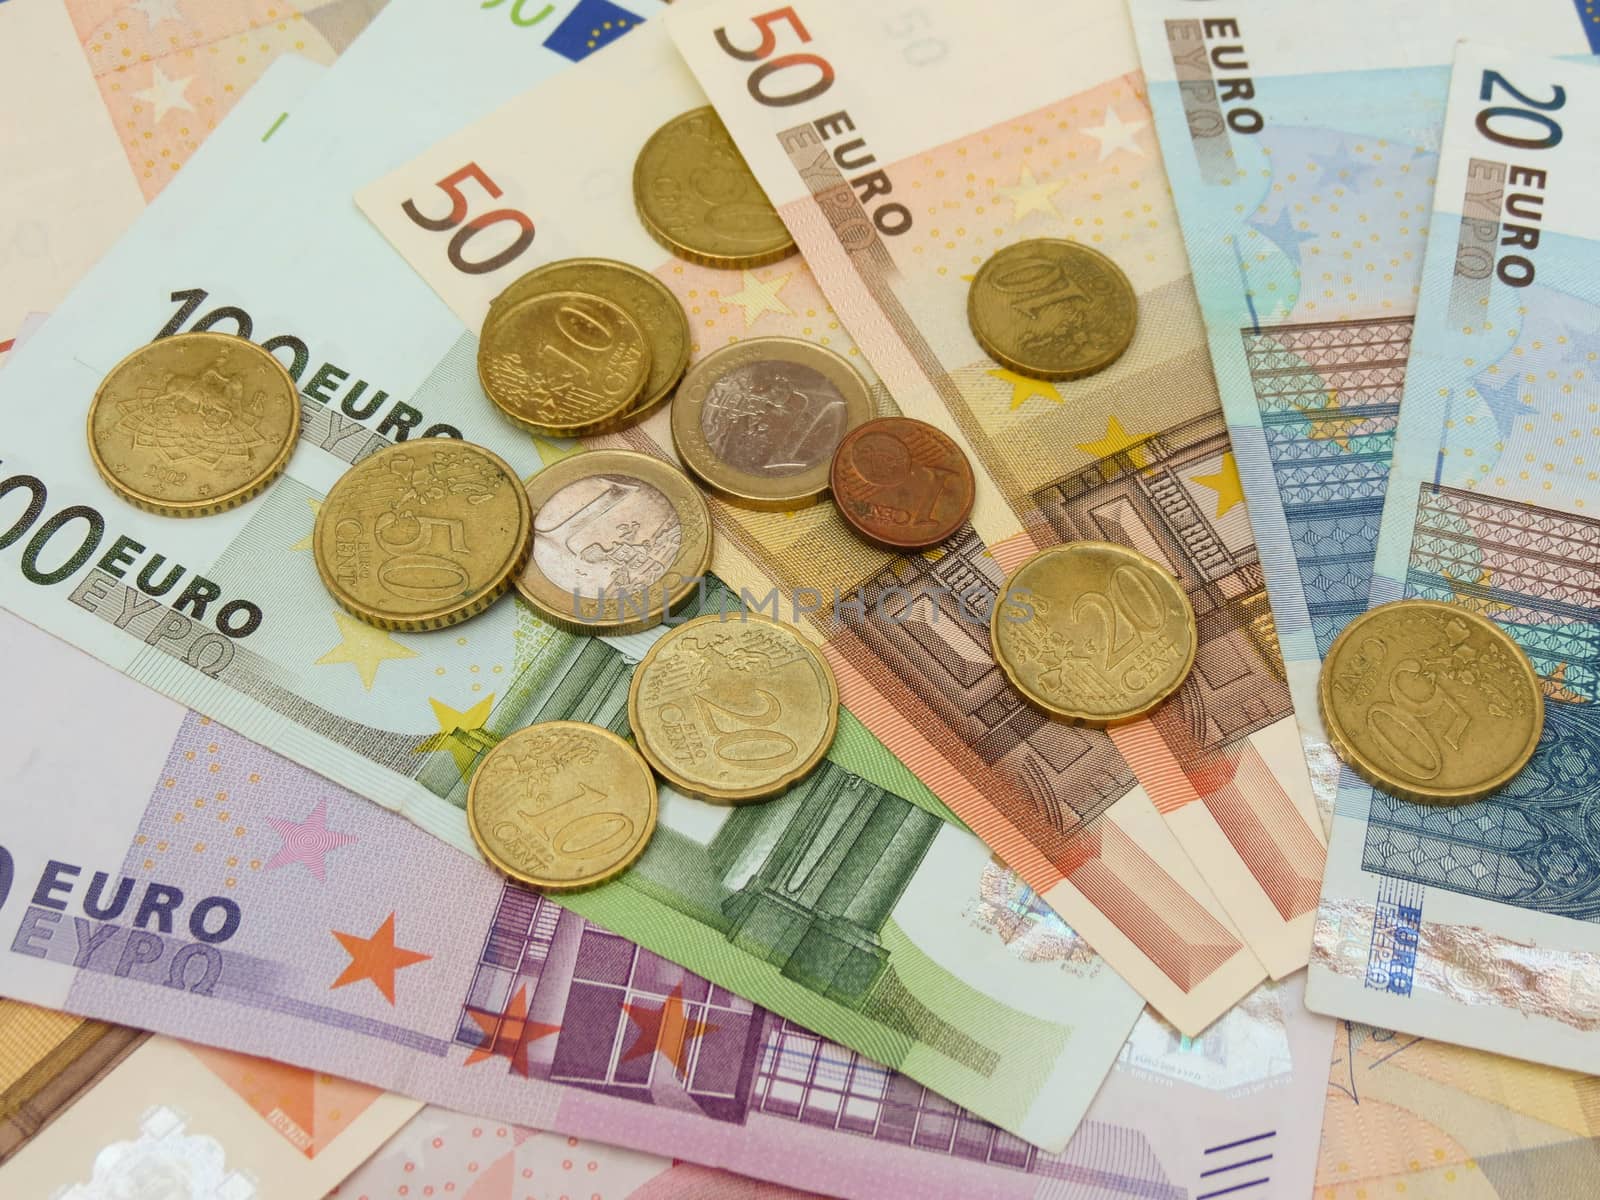 Euro notes and coins by paolo77